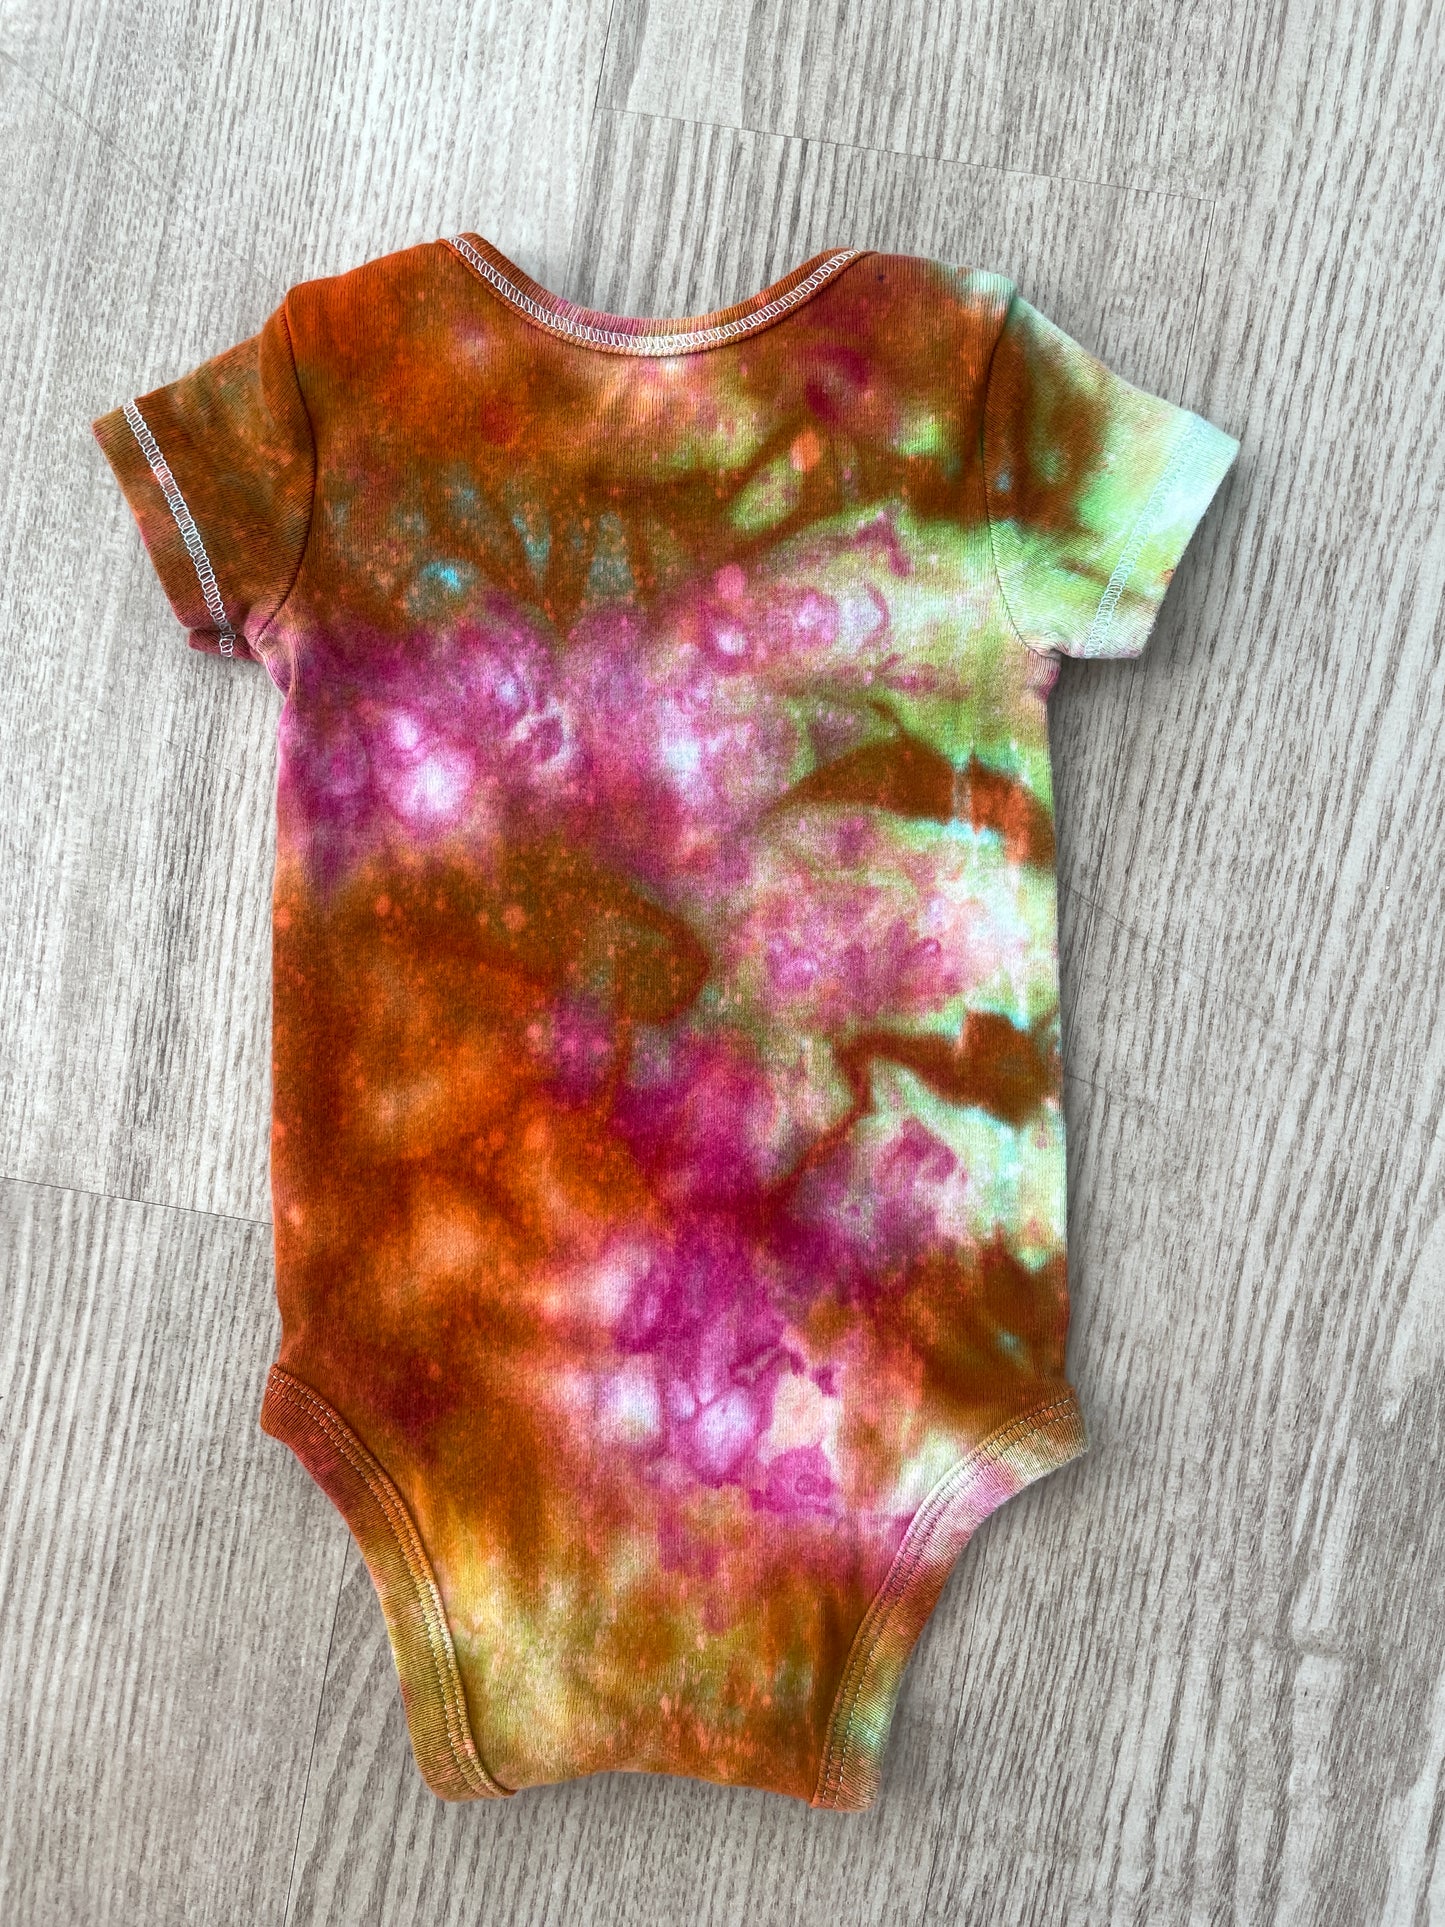 3 Months Climbing Shoe Short Sleeve Baby Onesie | Handmade, Upcycled Tie Dye Cotton Onesie | Galaxy Ice Dyed Pink and Orange Baby Clothing